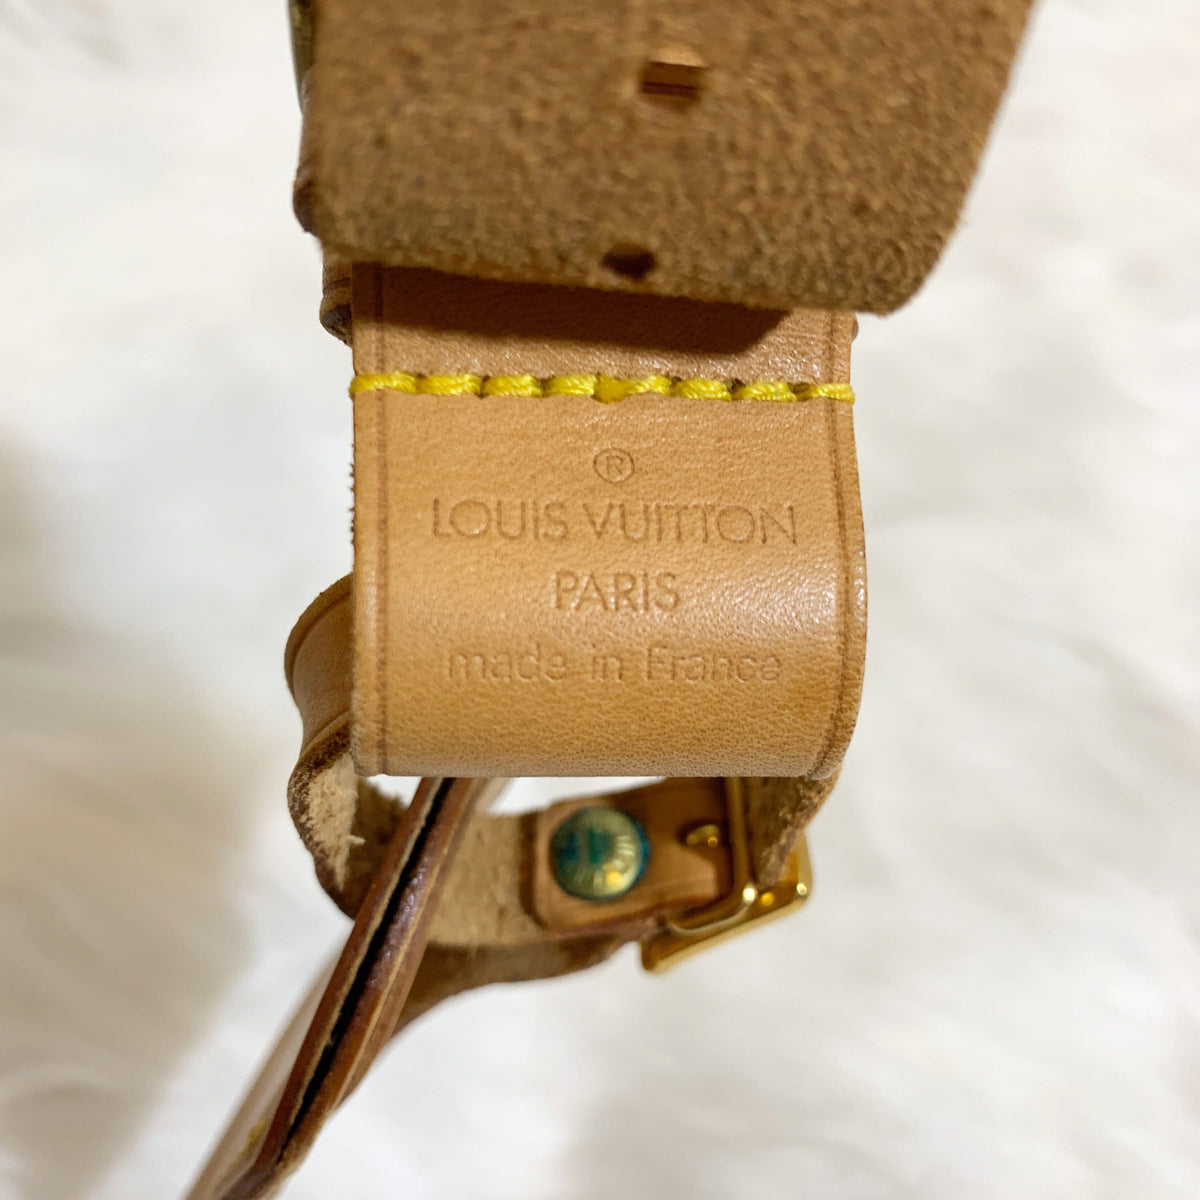 Pre-Owned Authentic Louis Vuitton Leather Name Tag (006)